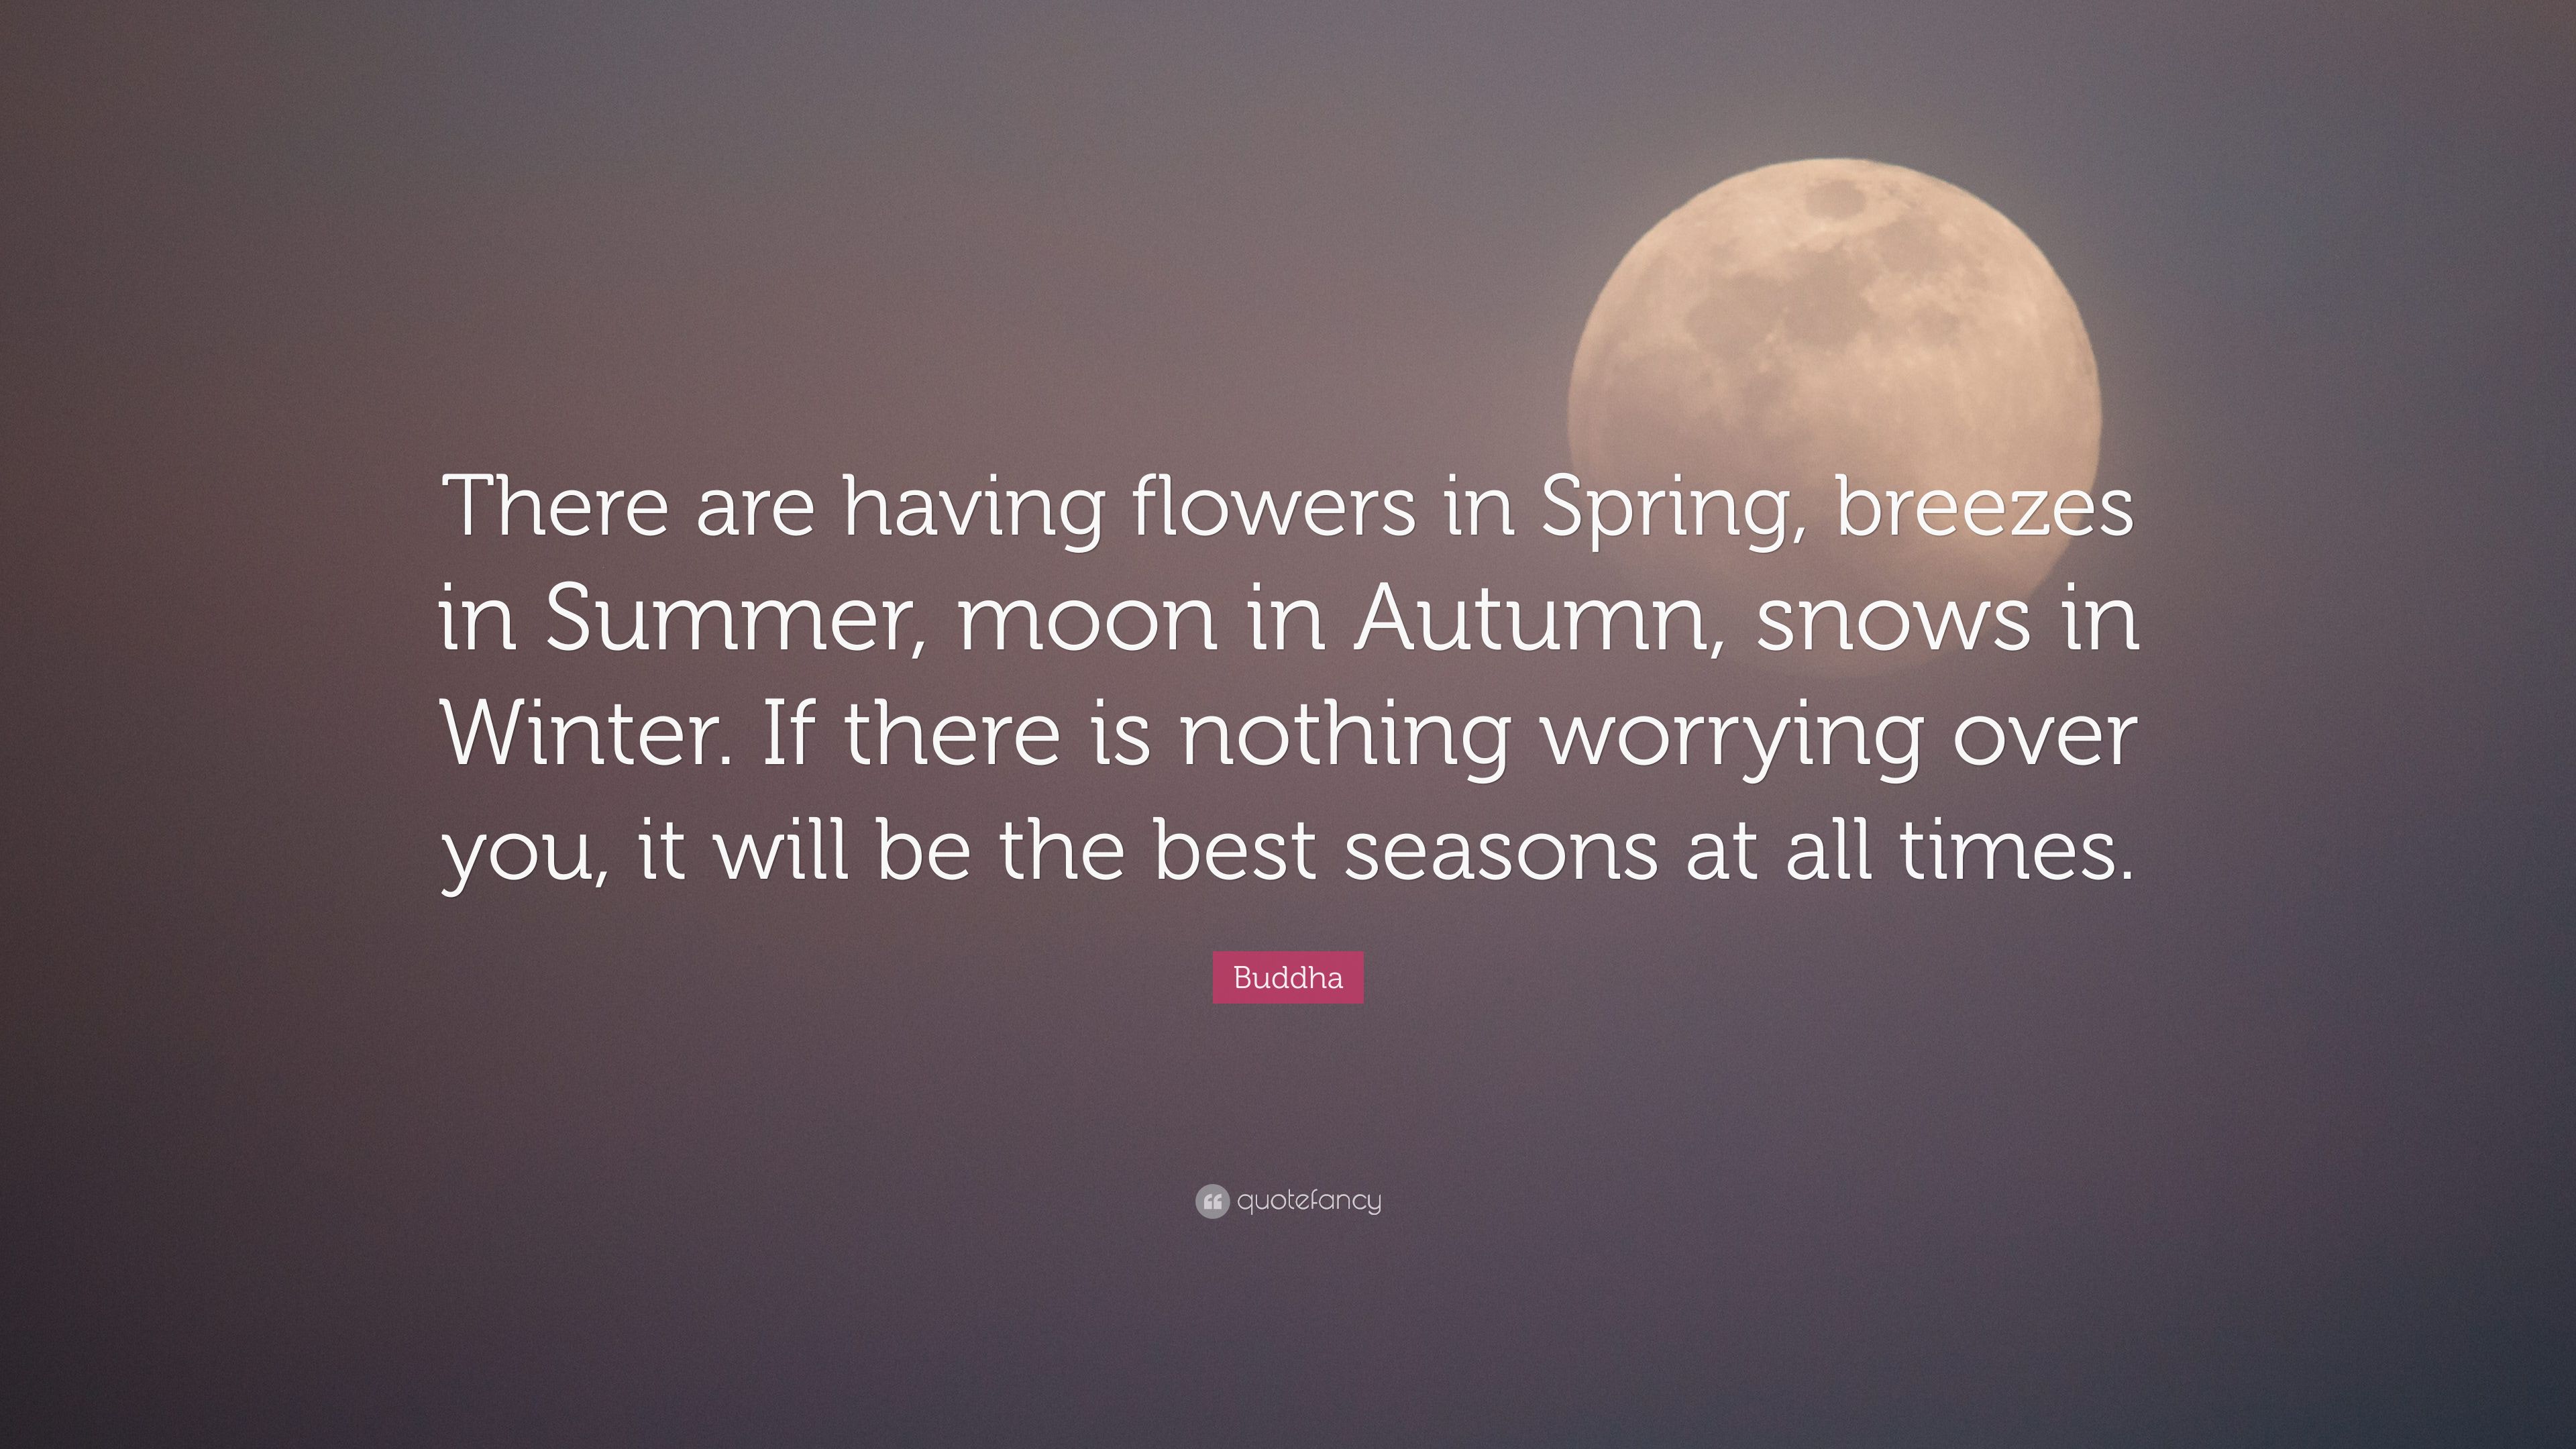 Buddha Quote: “There are having flowers in Spring, breezes